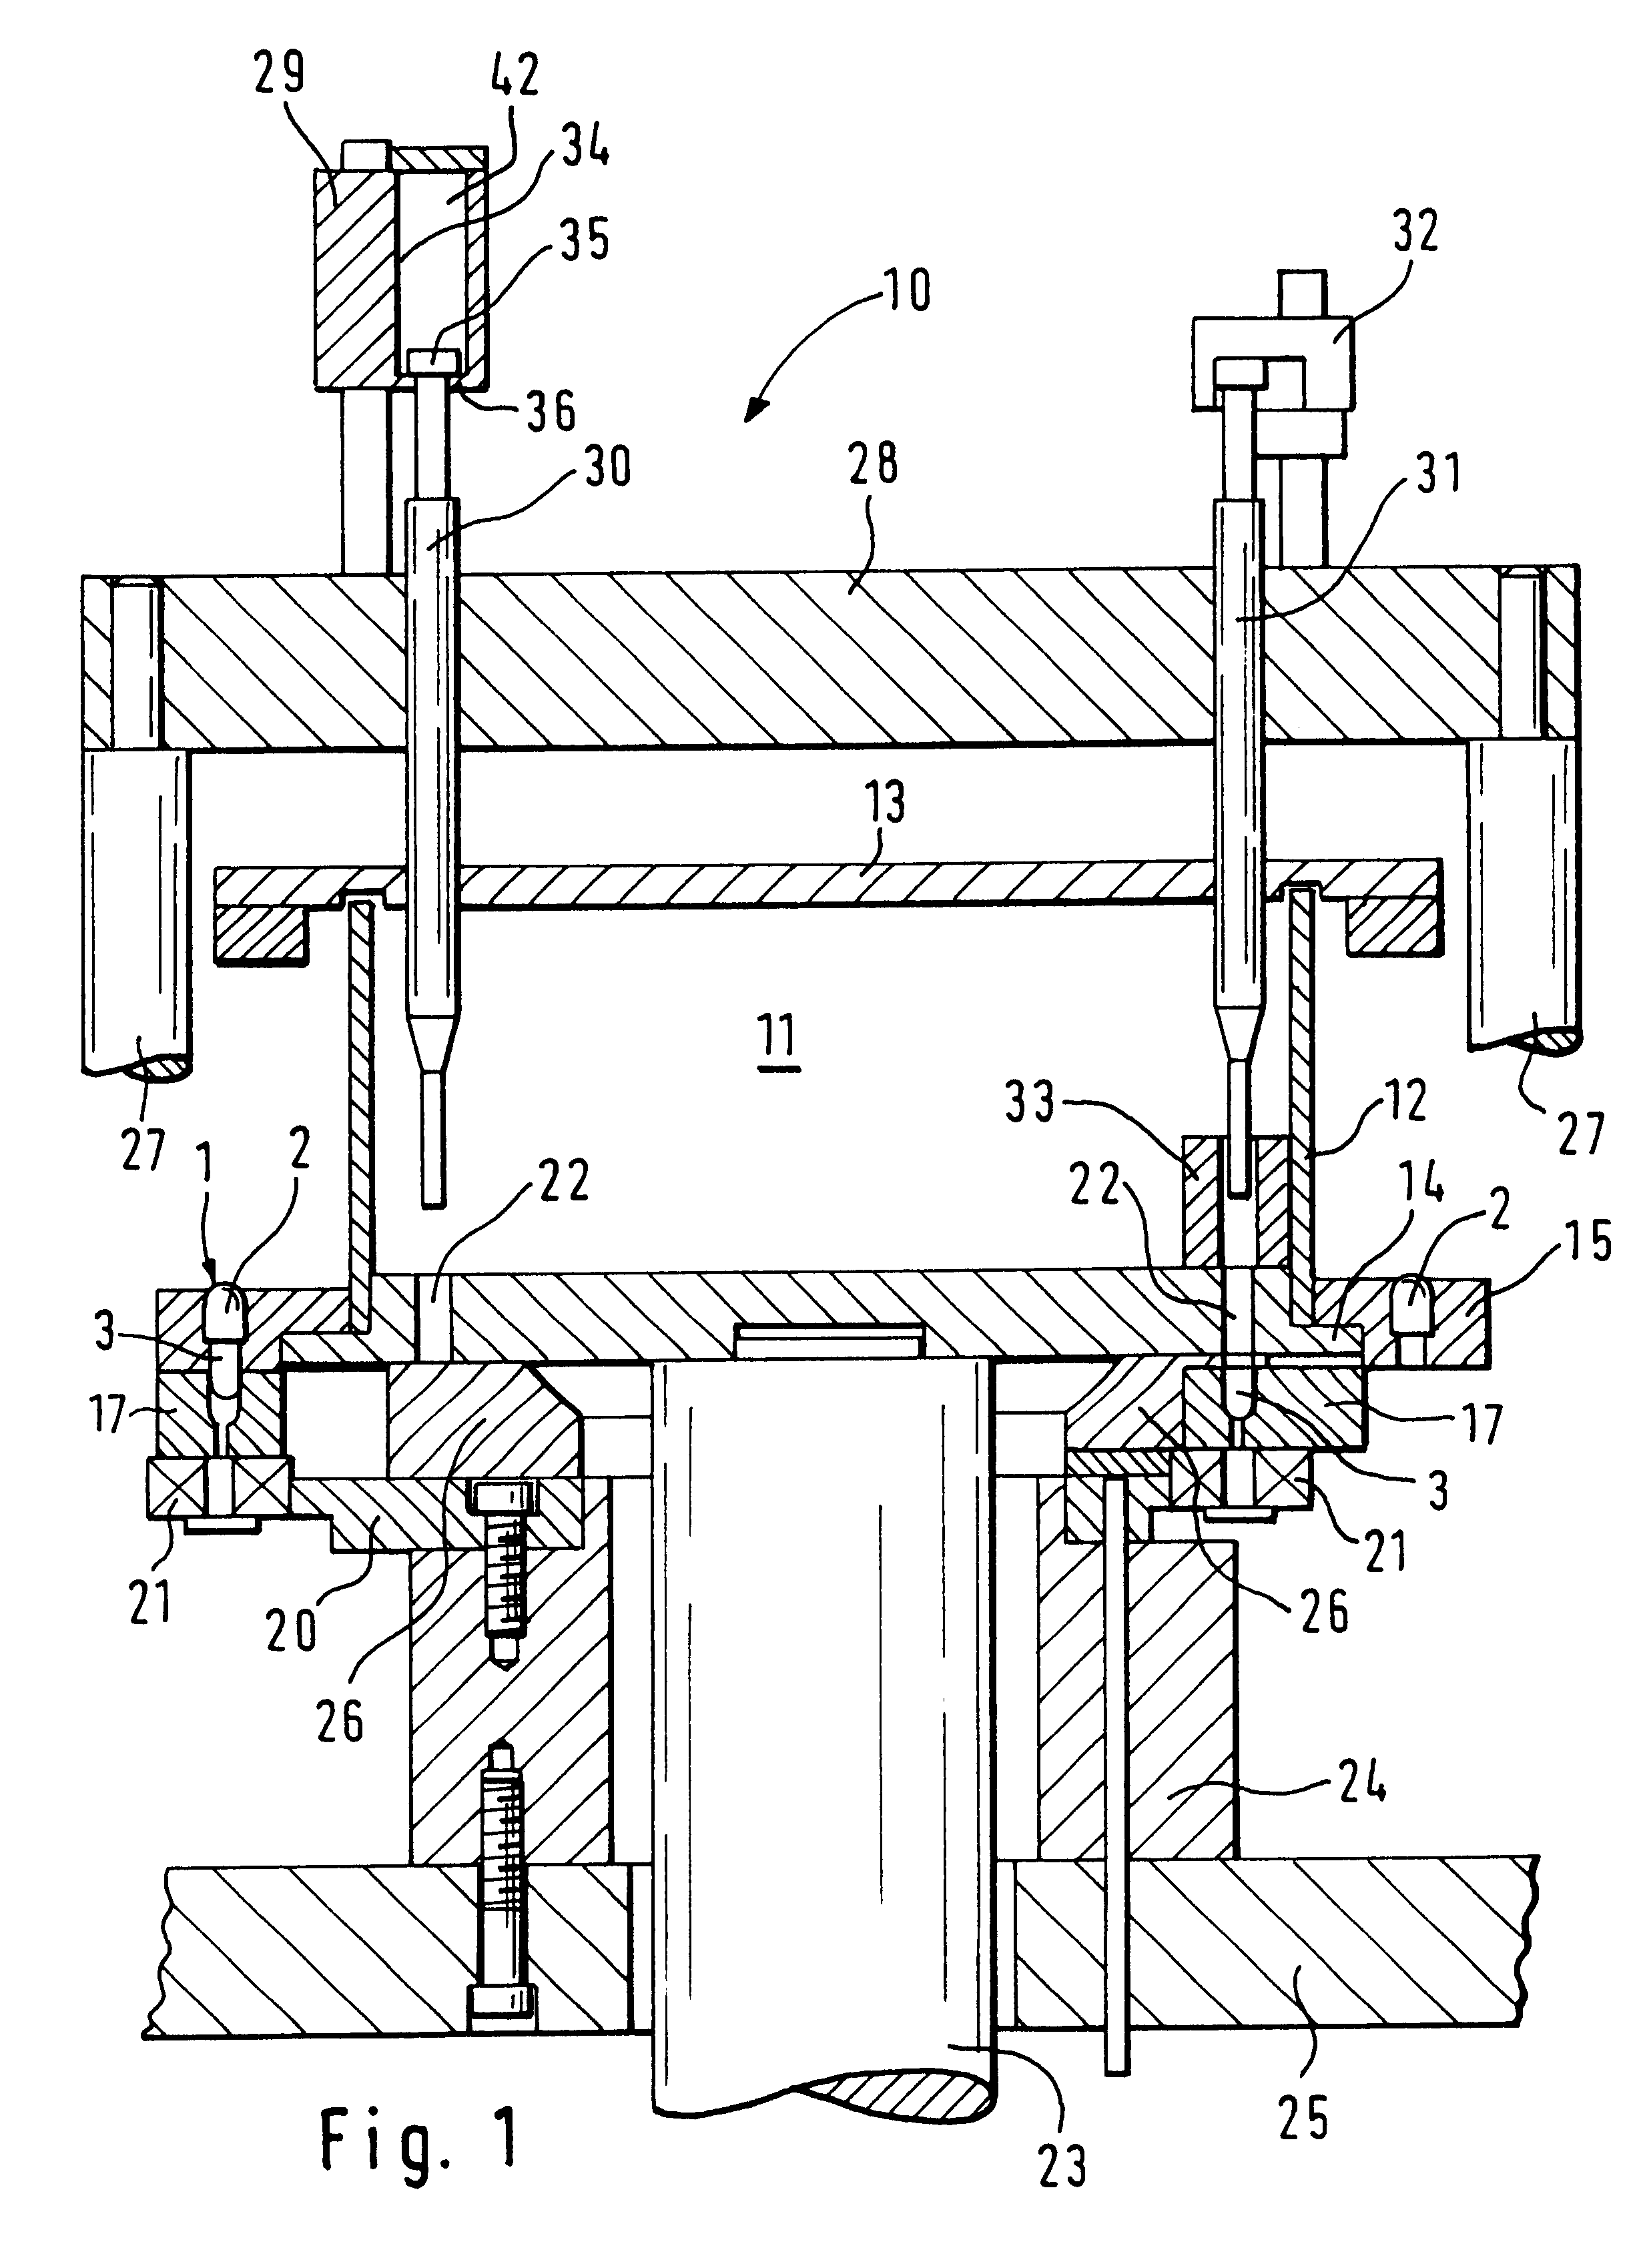 Apparatus for metering and dispensing powder into hard gelatin capsules or the like